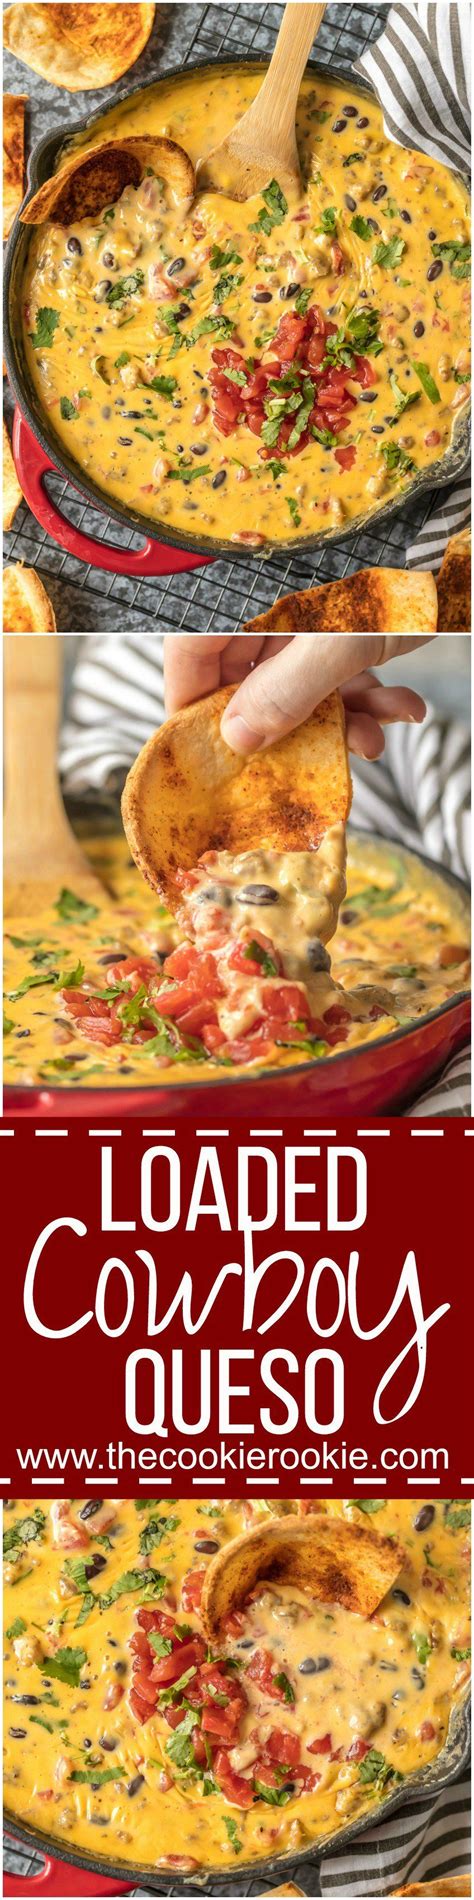 LOADED COWBOY QUESO is the ultimate Super Bowl dip! This EASY appetizer is loaded with velveeta ...